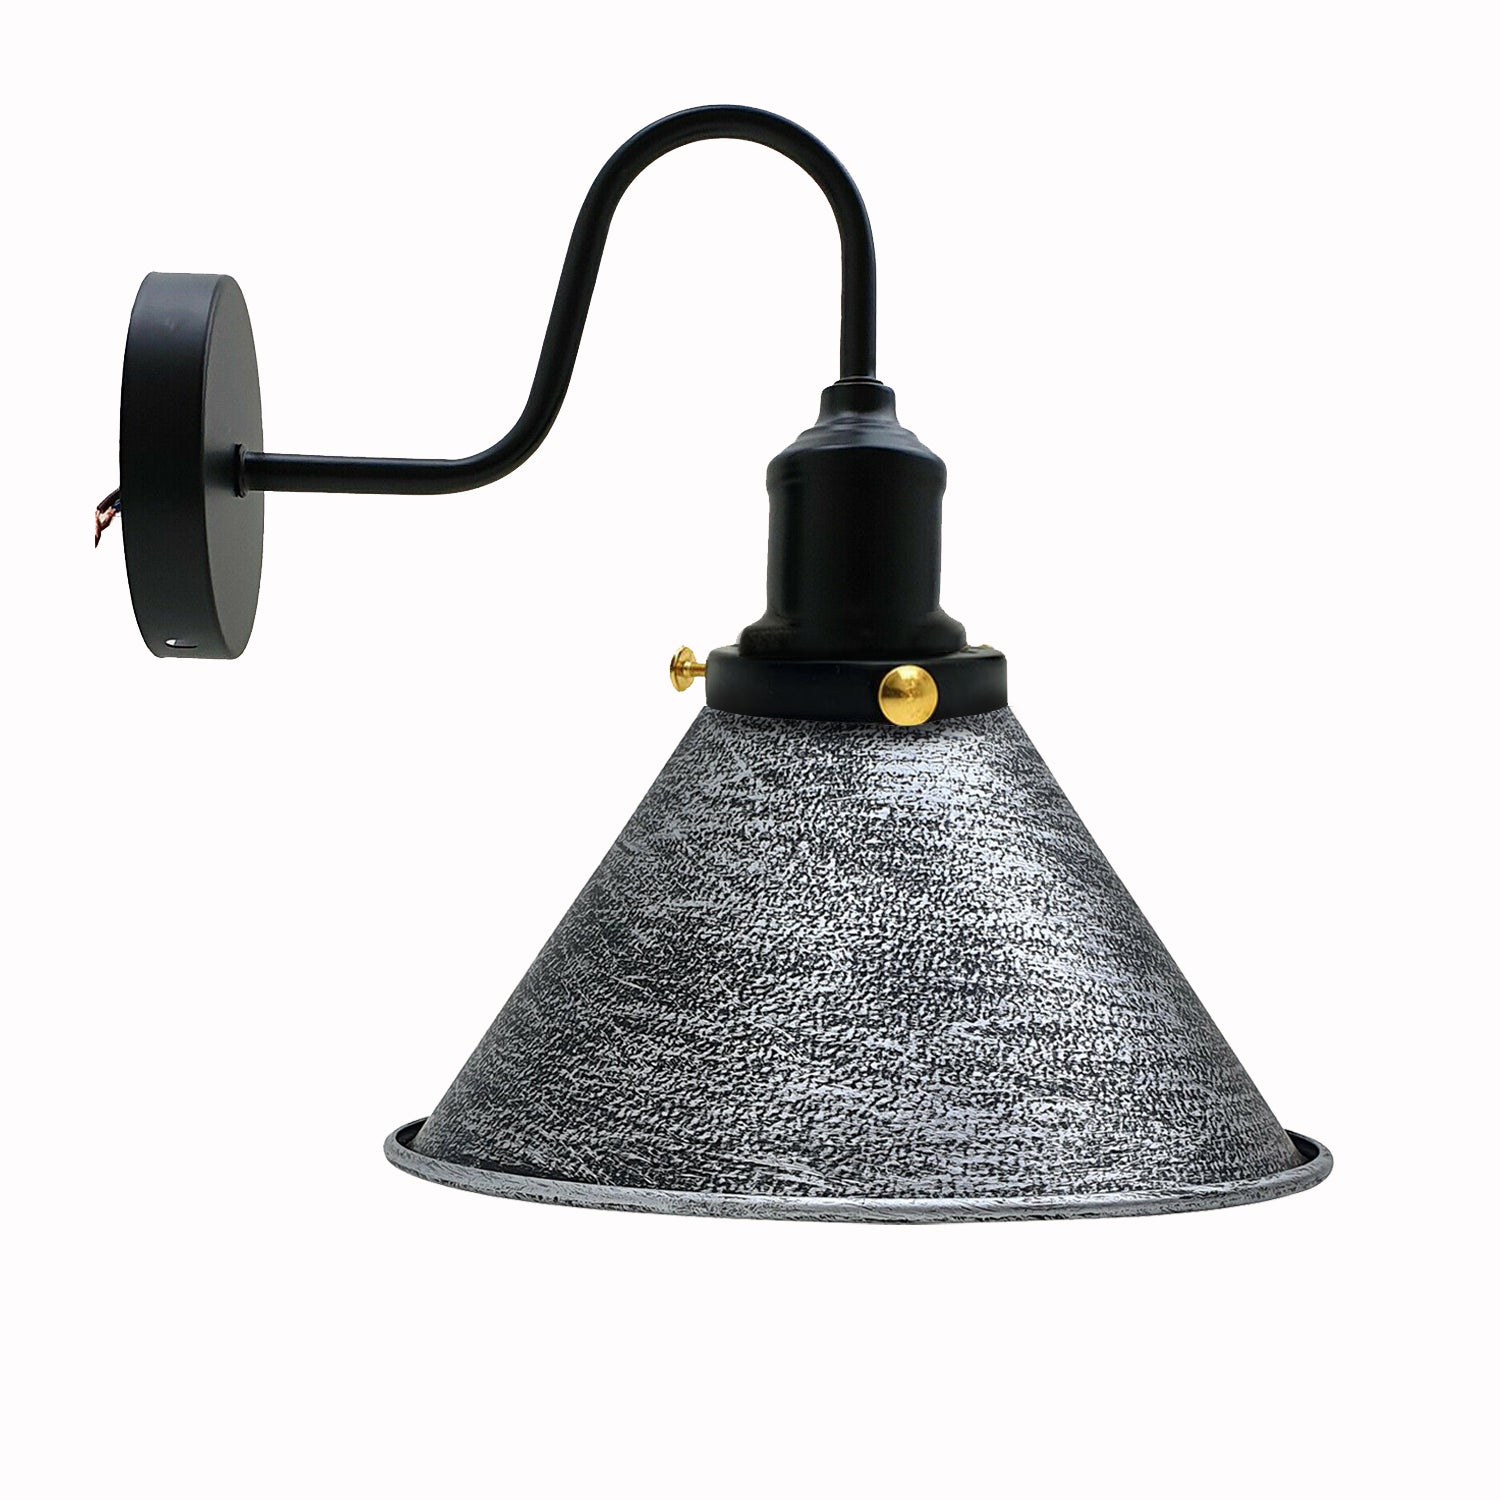 Retro Industrial Swan Neck Cone Shape Wall Sconce Light